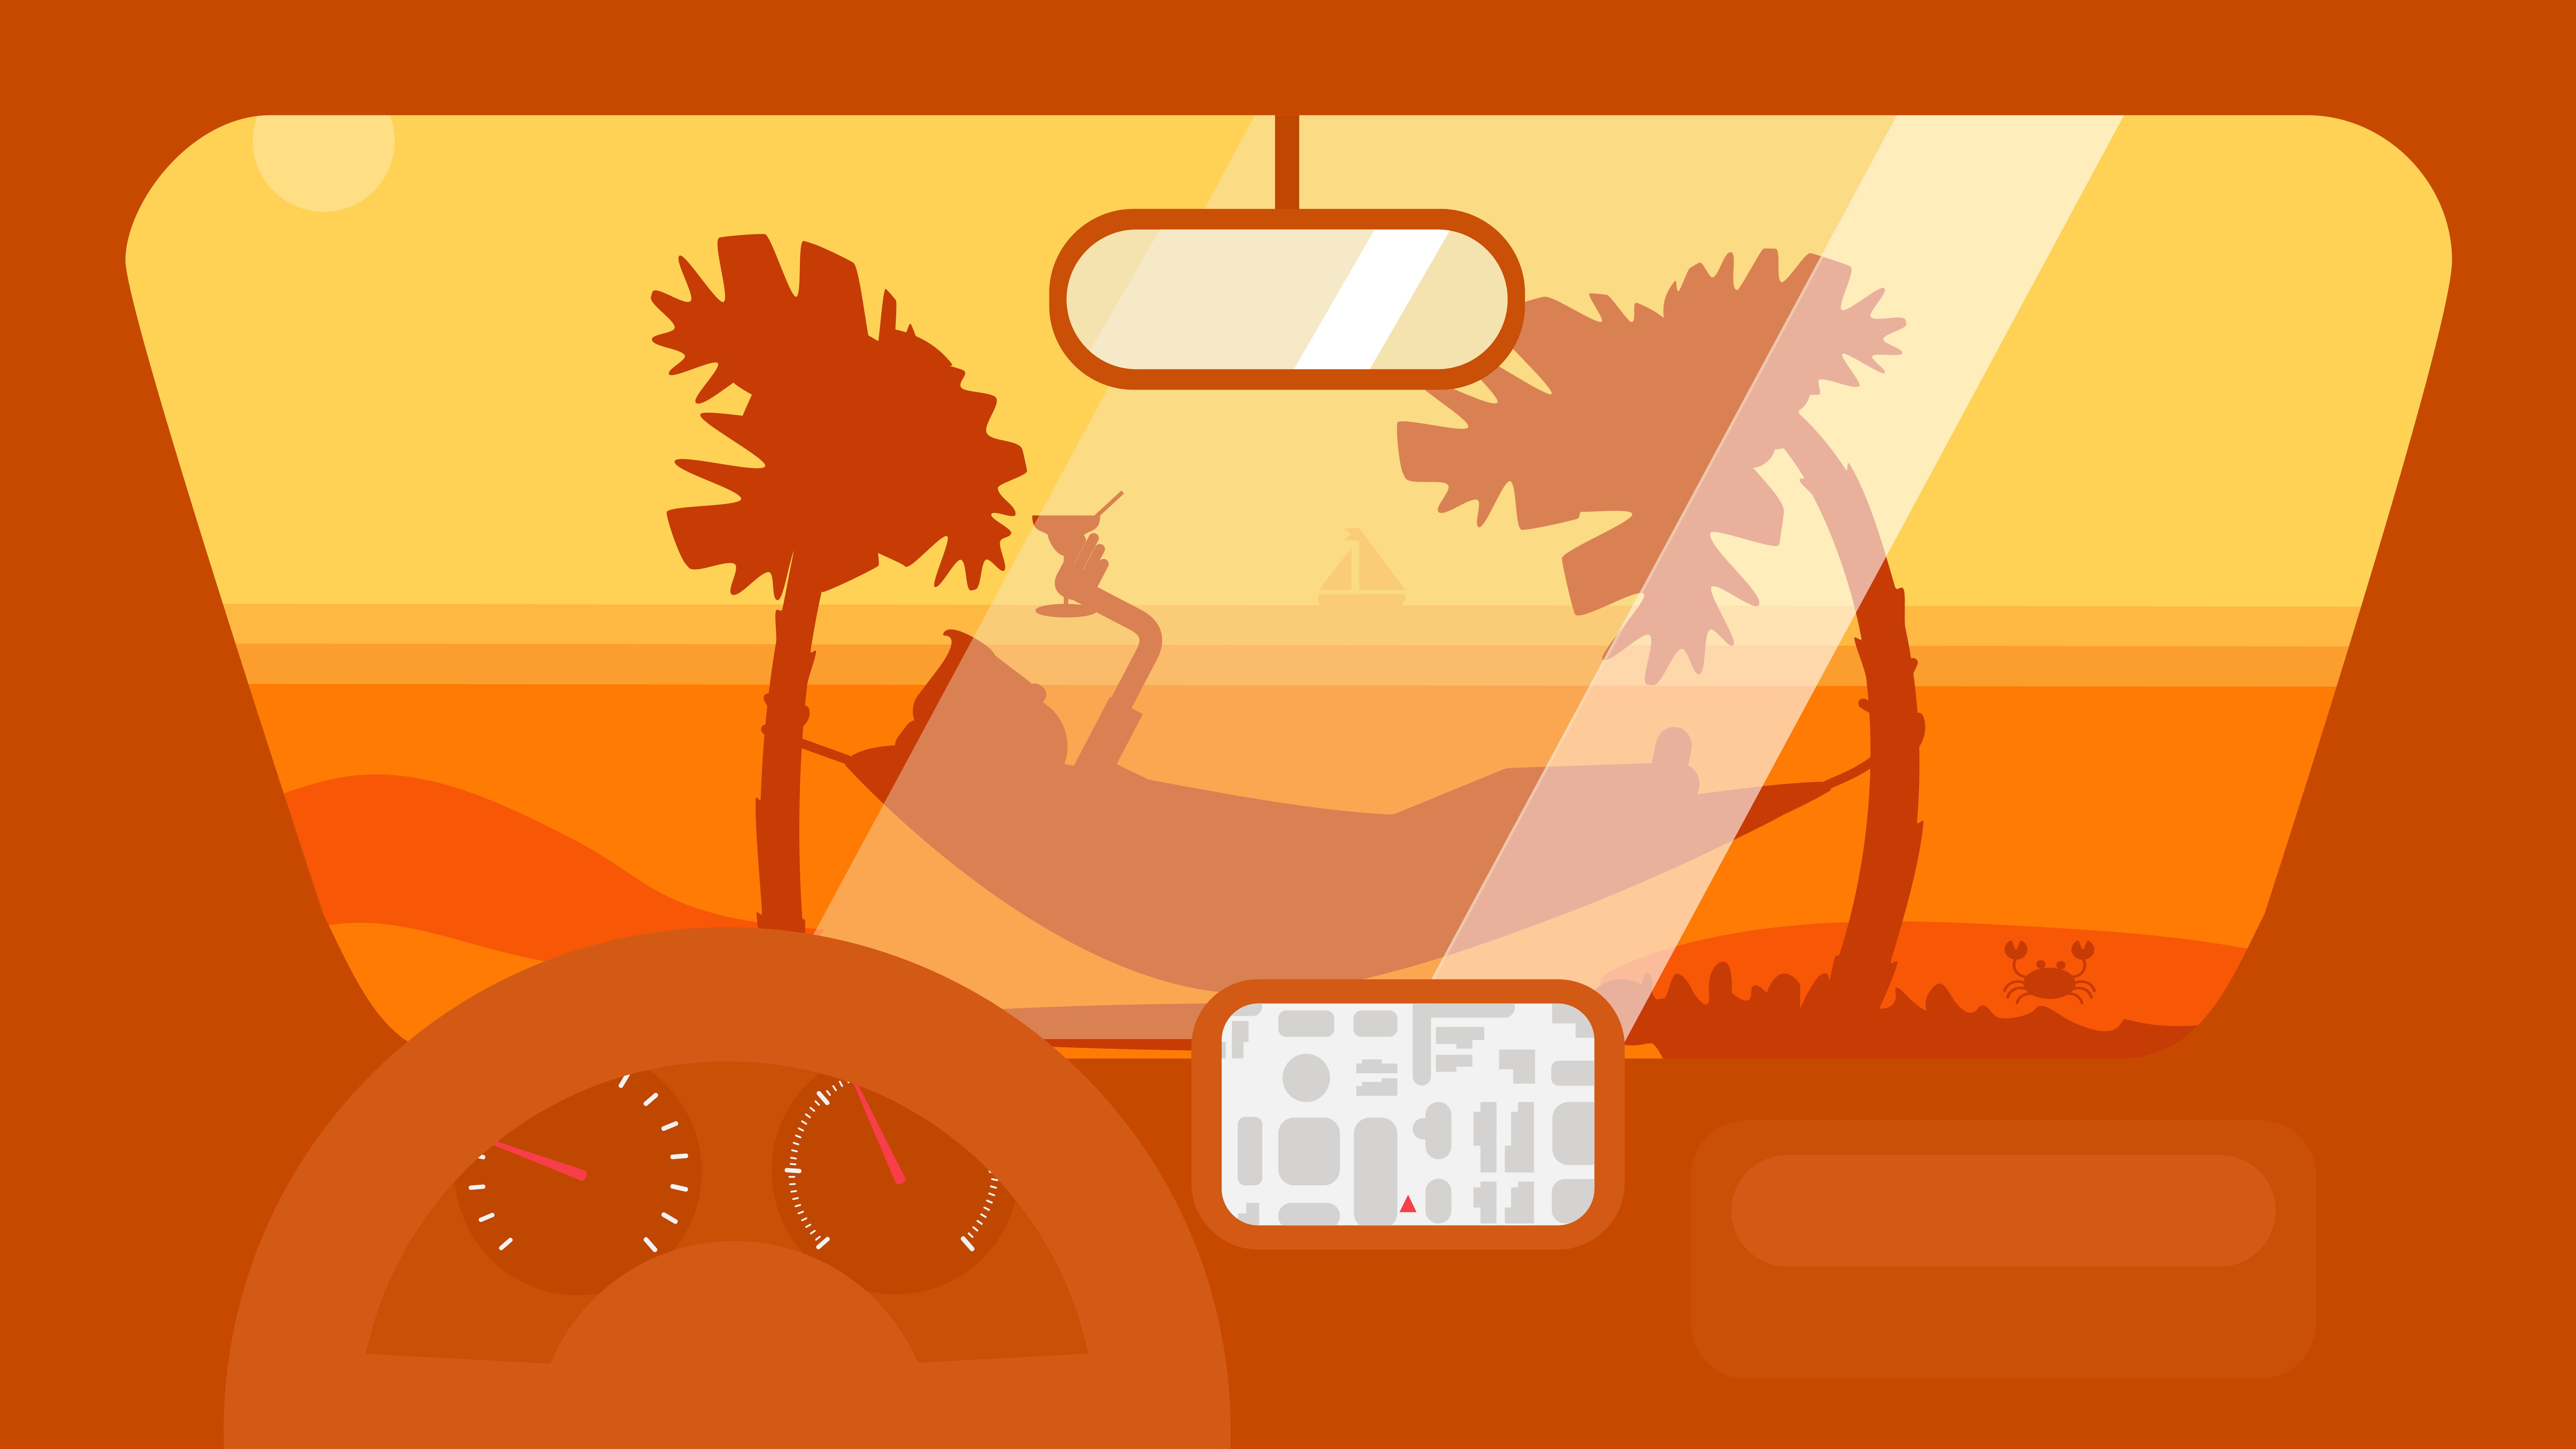 Travel By Car To The Beach cover image.